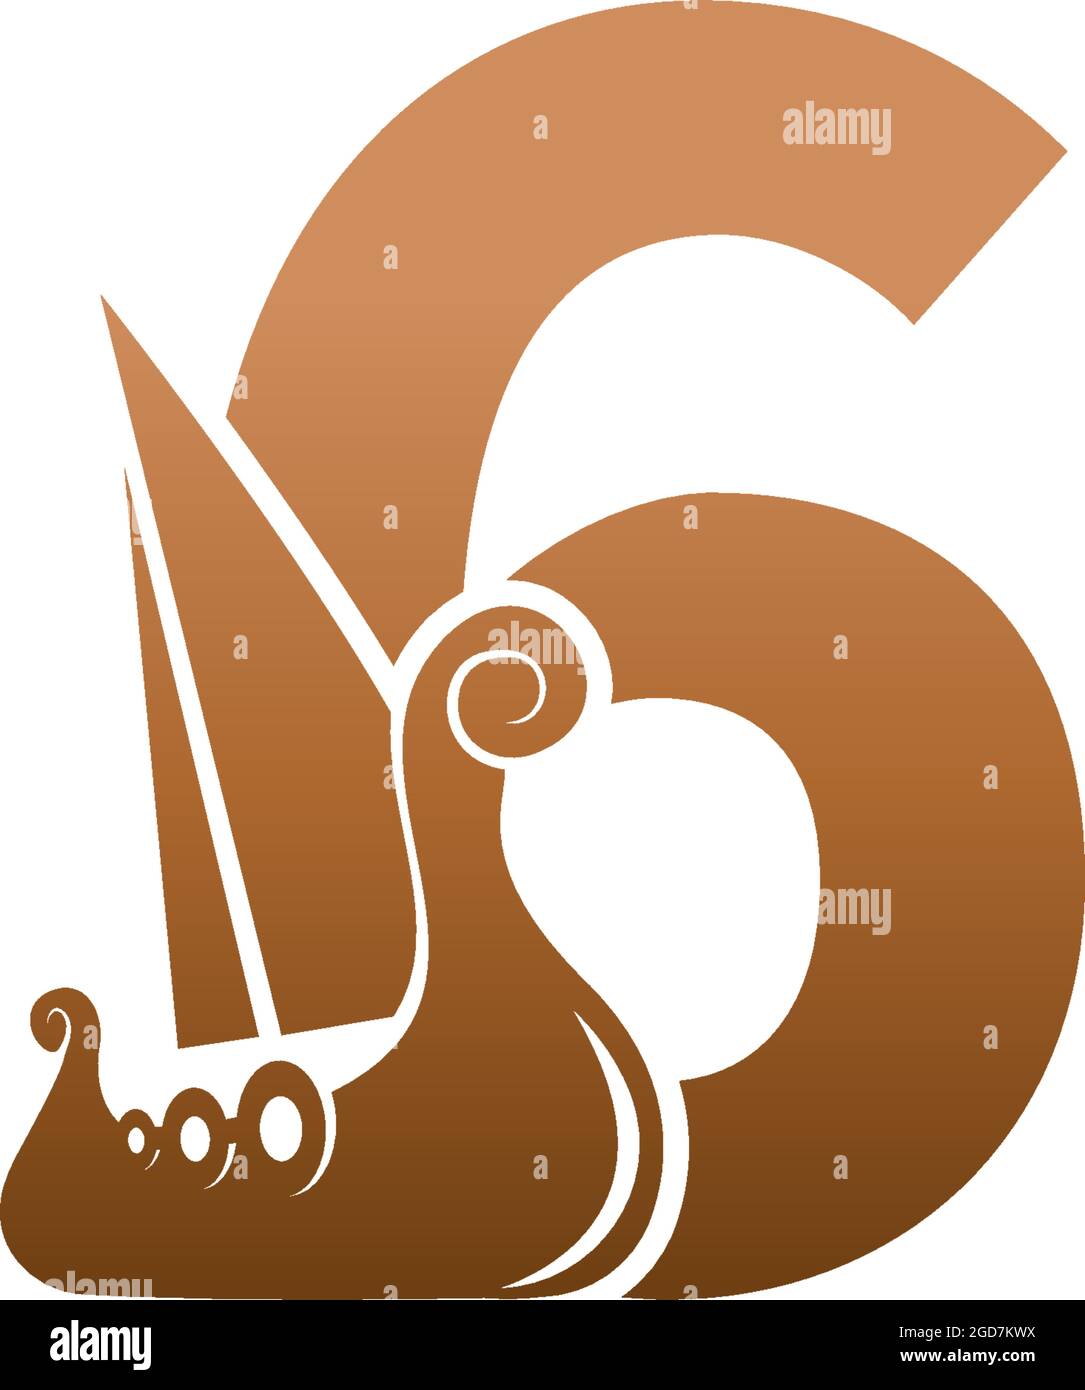 Number 6 with logo icon viking sailboat design template illustration Stock Vector